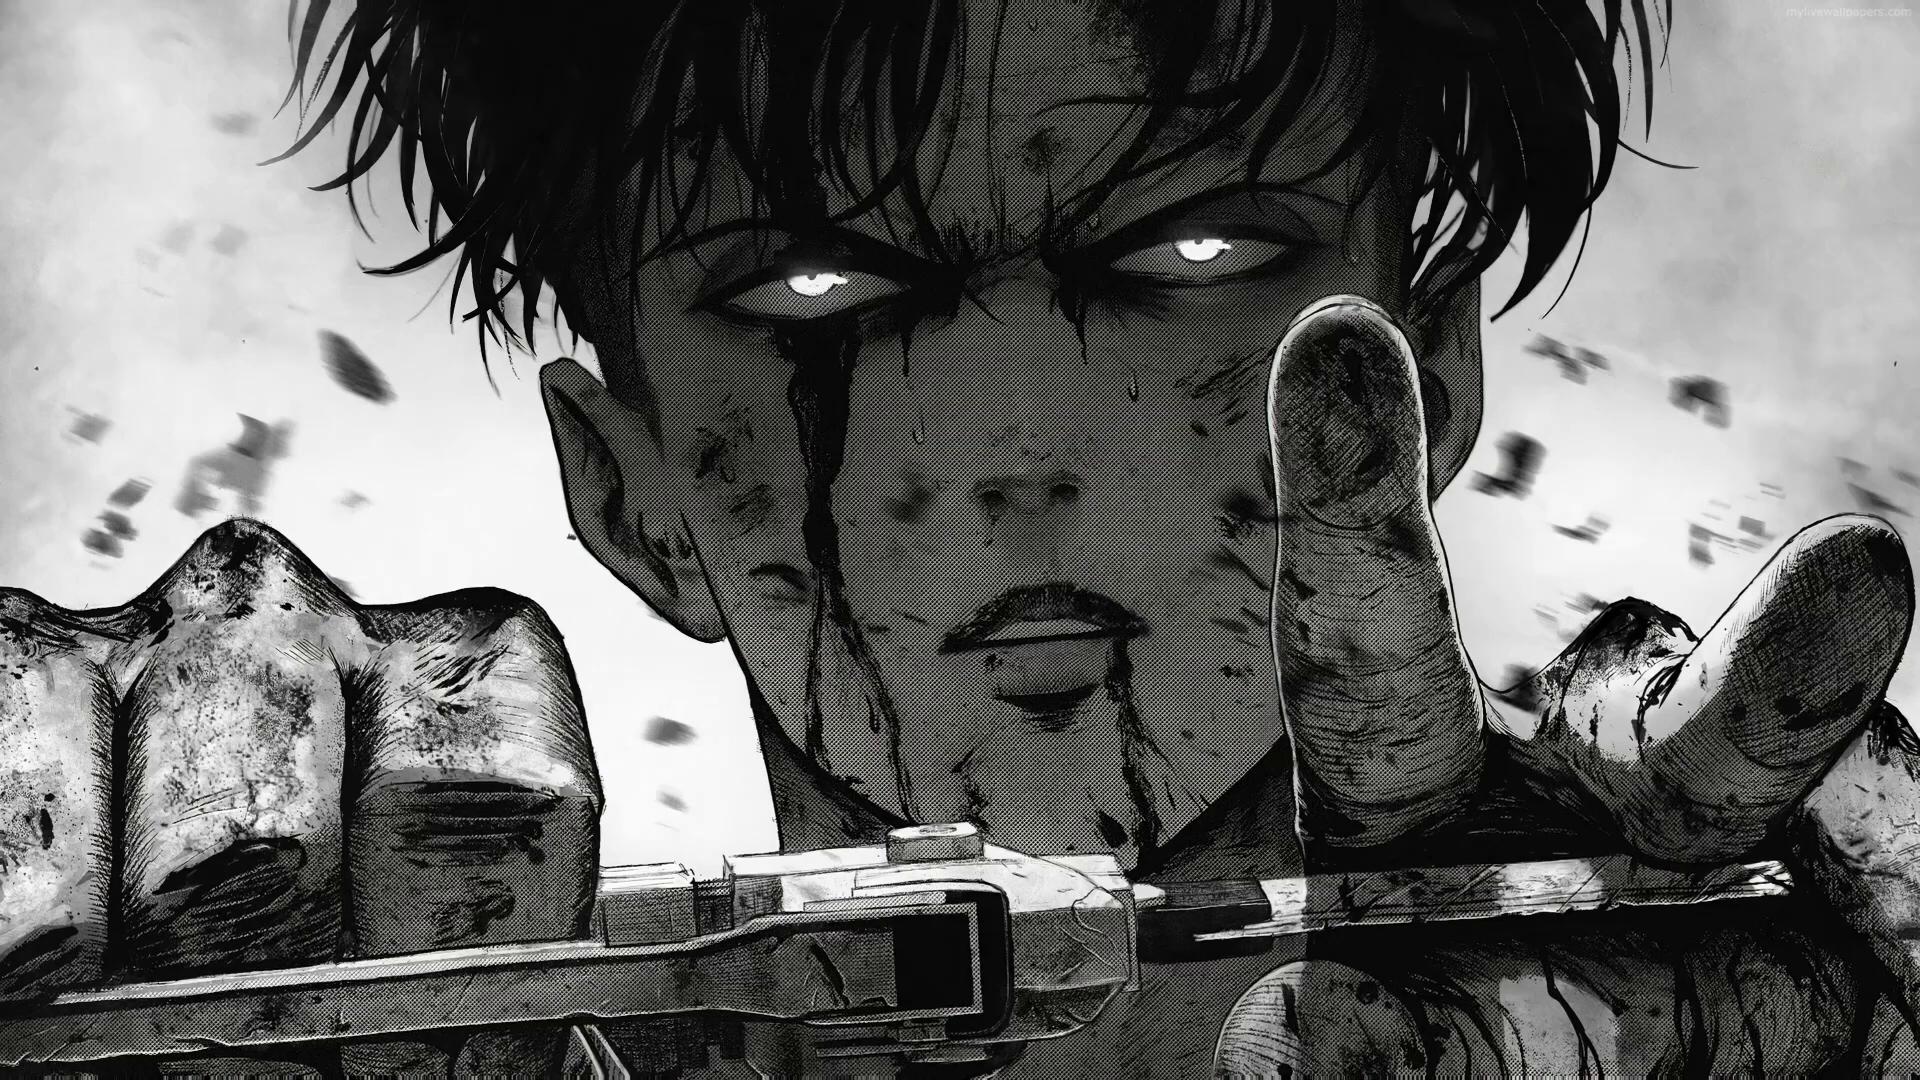 Levi Ackerman Attack on Titan Anime Wallpapers - Epic Wallpapers